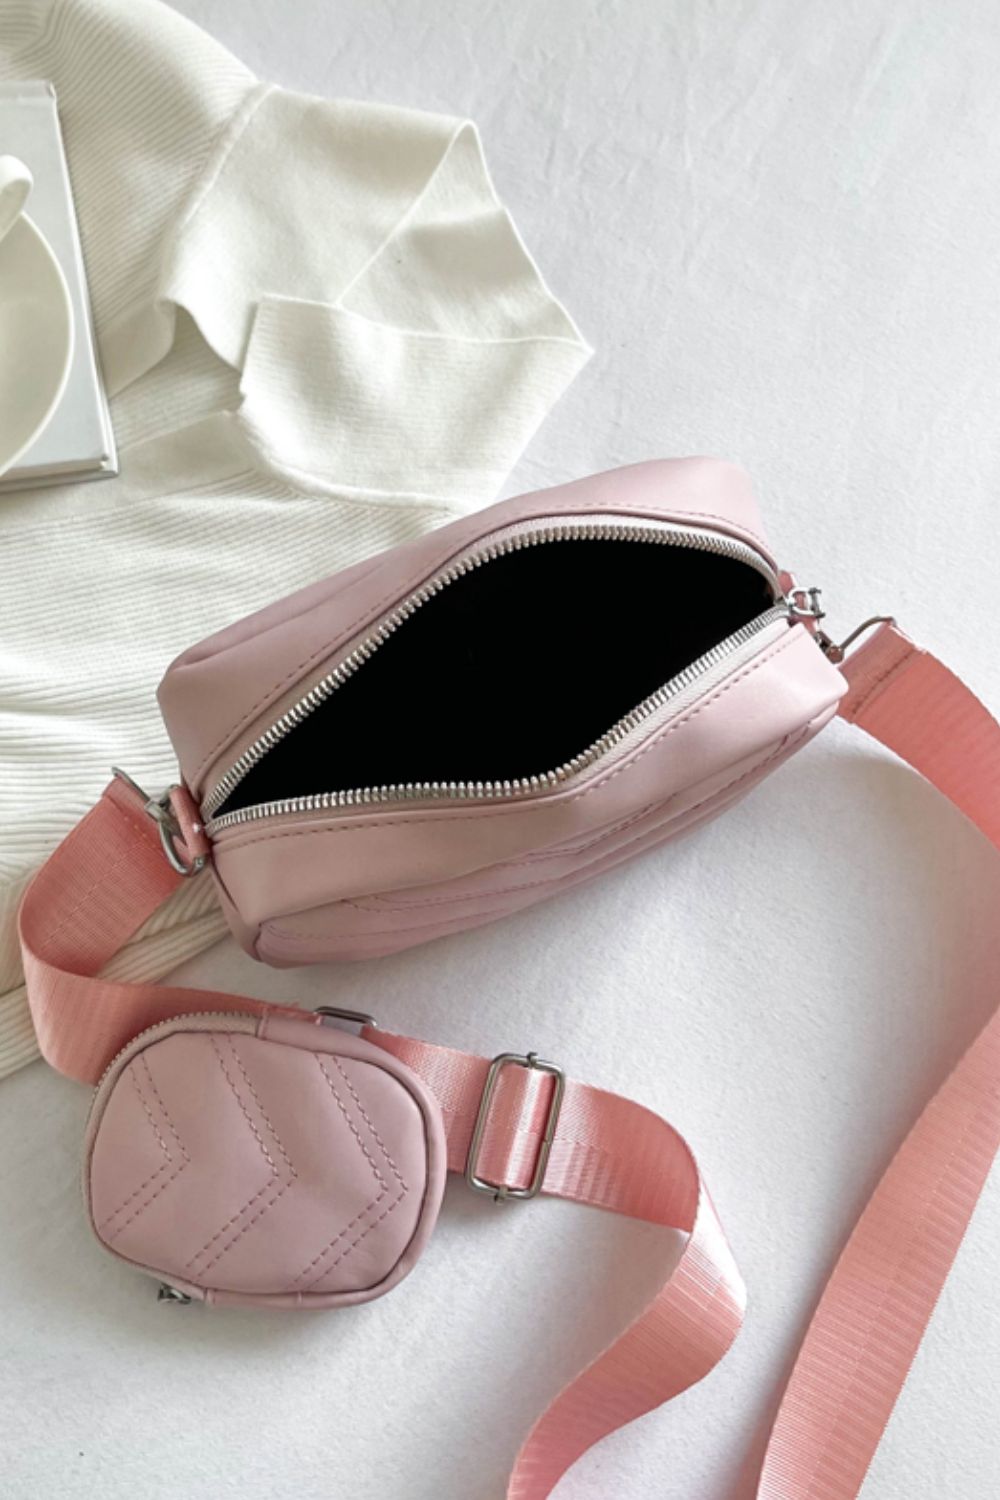 pu leather shoulder handbag with small purse, blush pink, top-down view of open handbag on bed